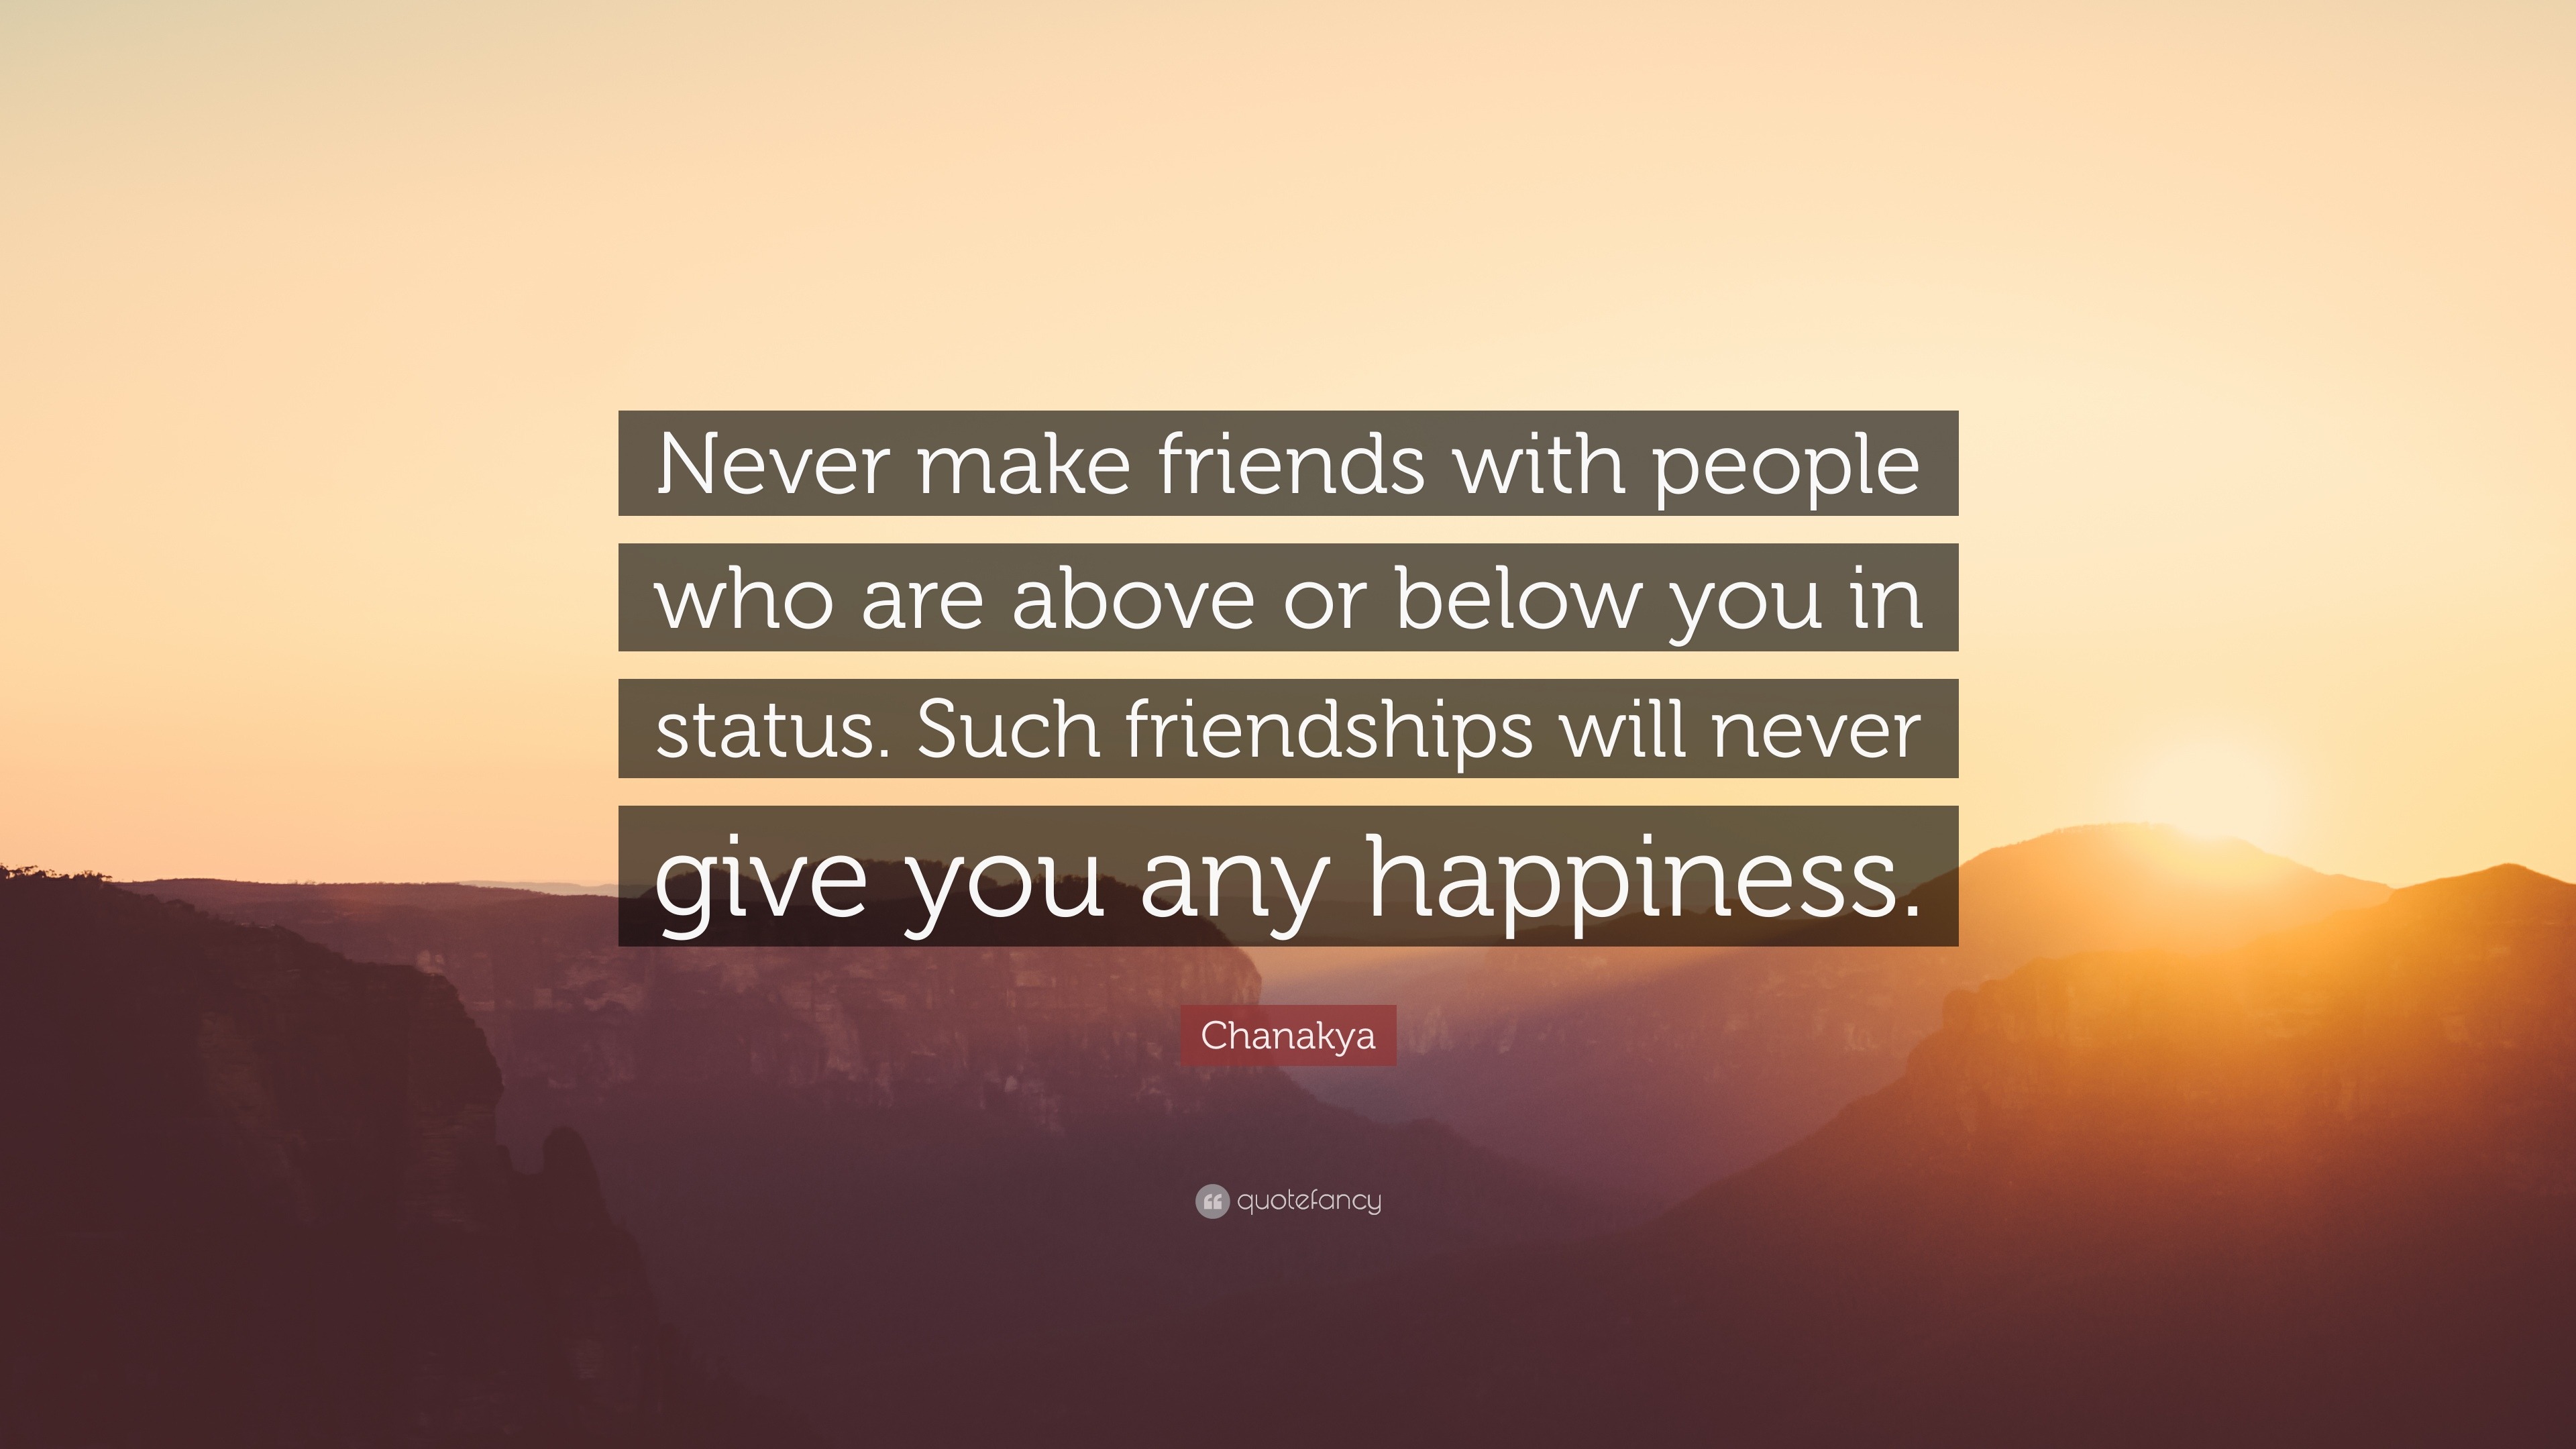 Chanakya Quote: “Never make friends with people who are above or below ...